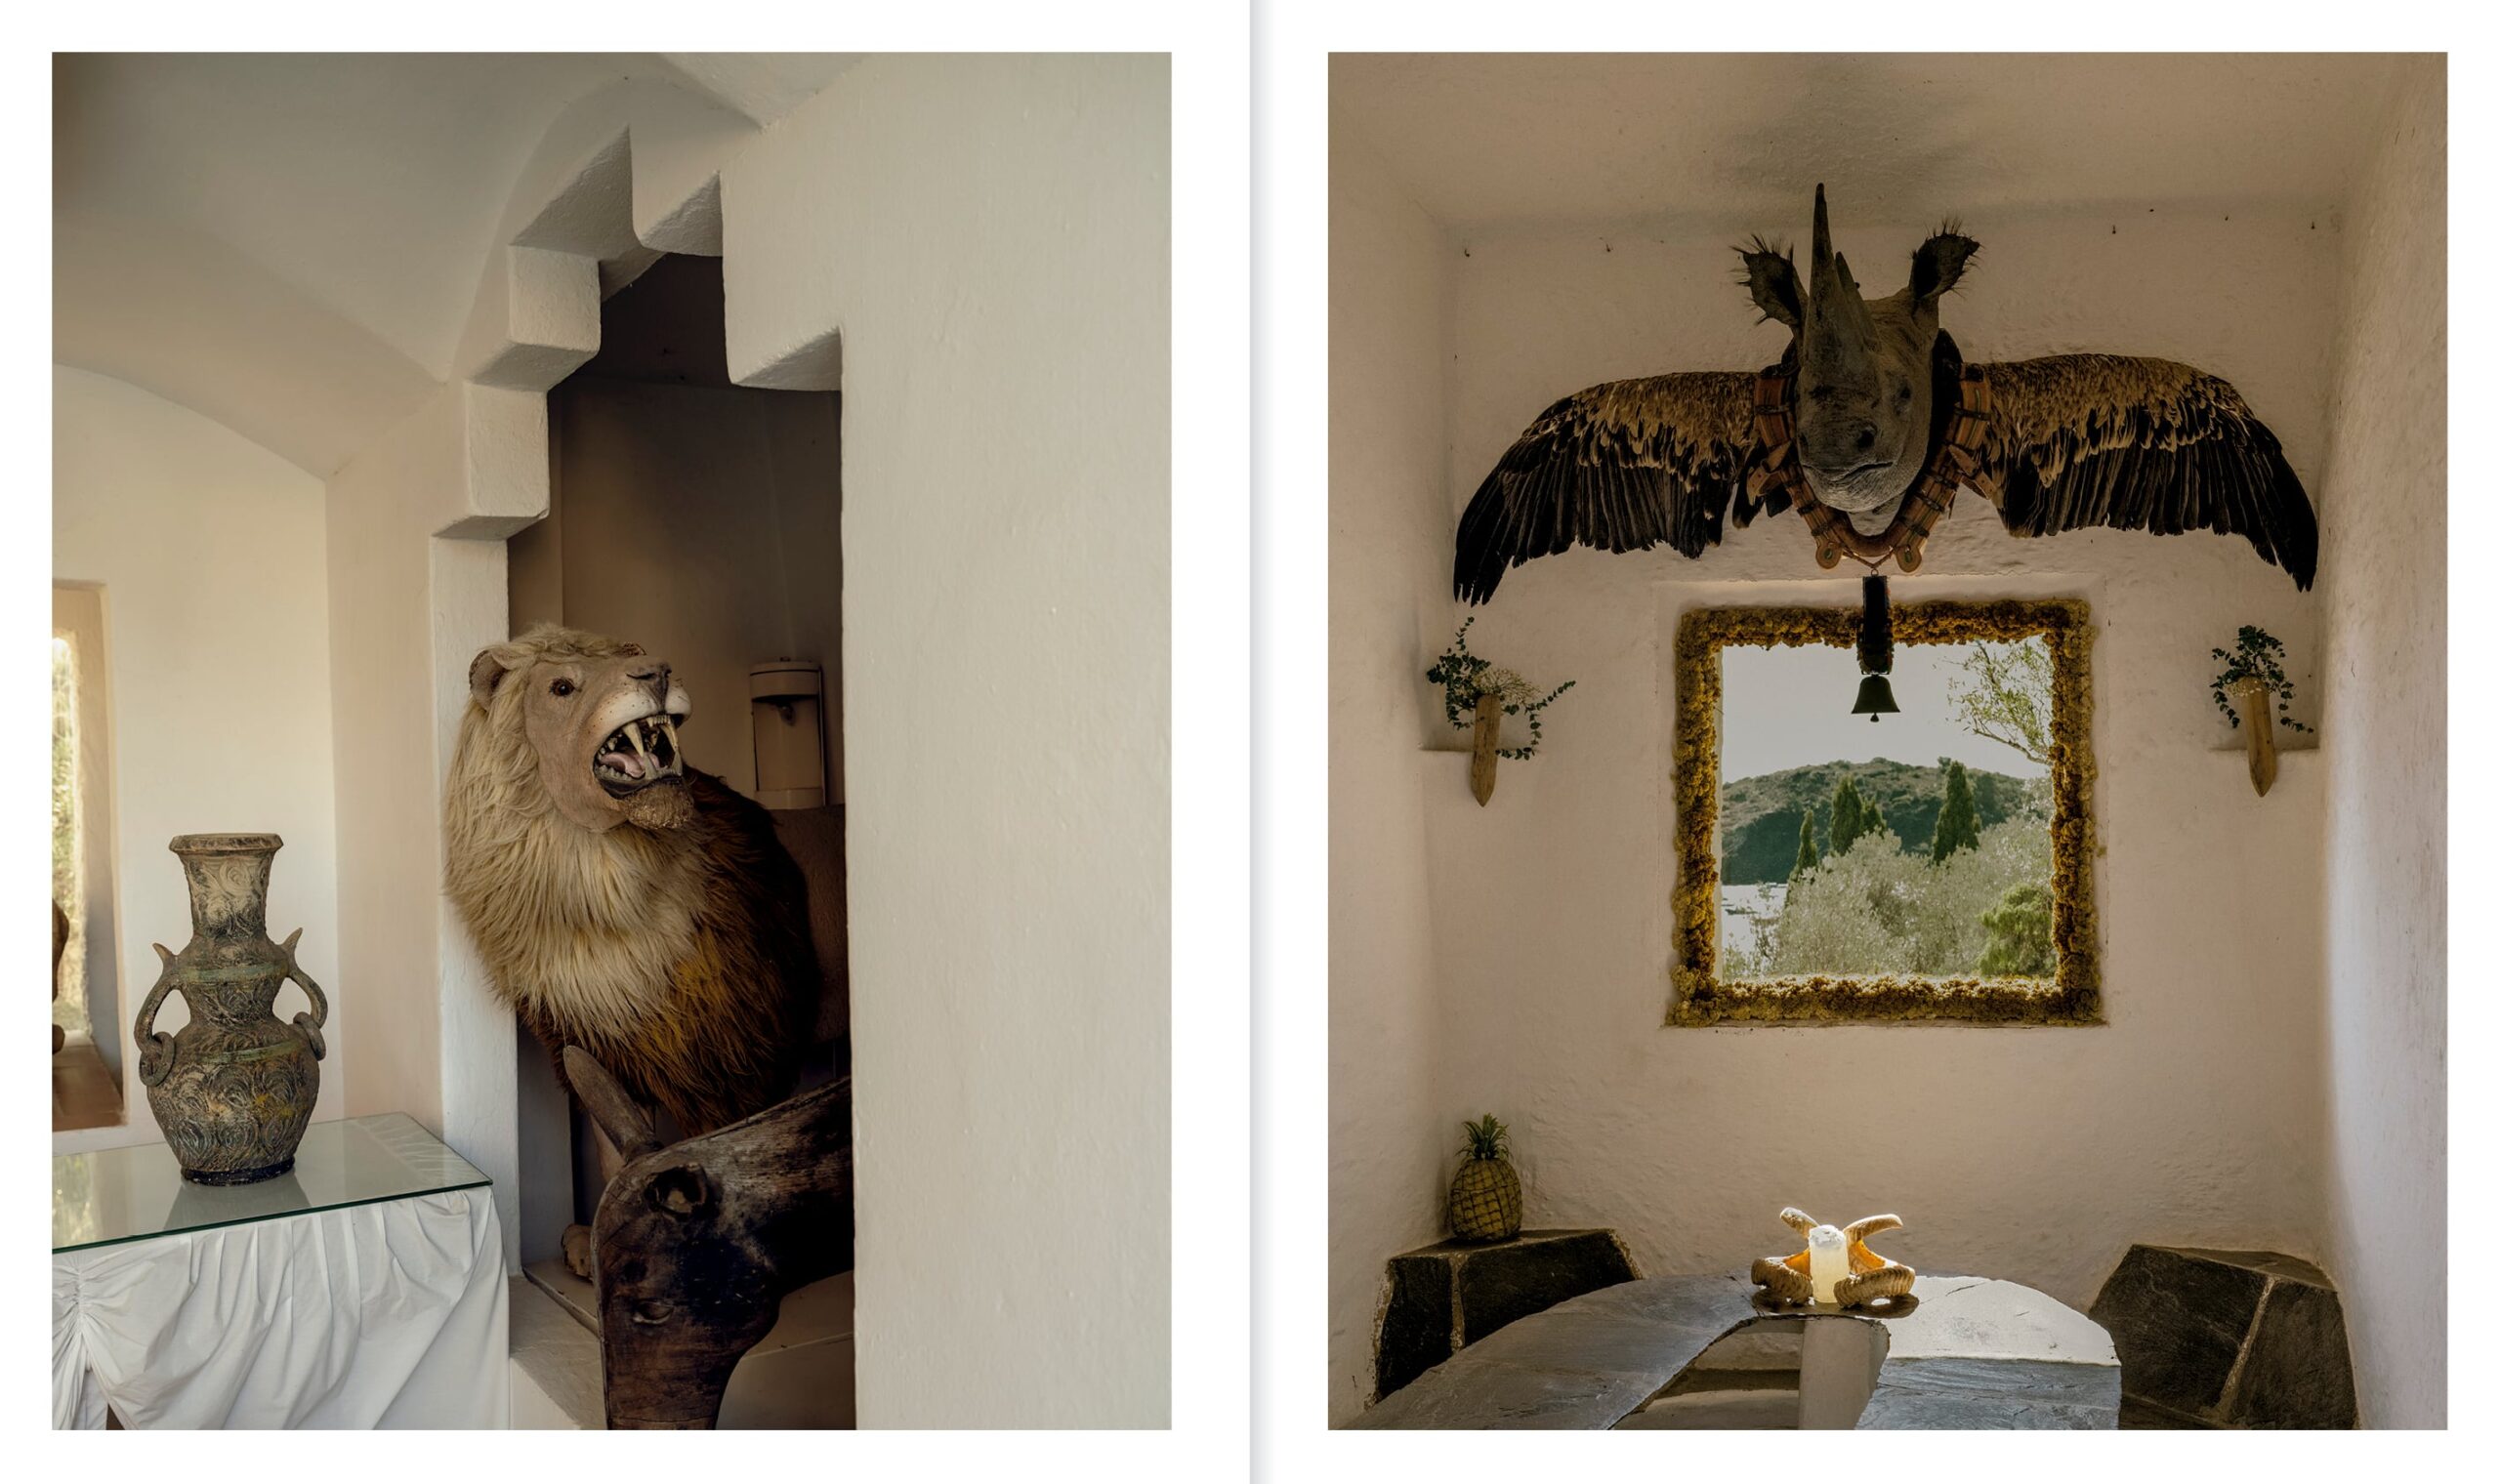 a book spread open to two images. on the left is a taxidermy lion with snarling teeth. on the right is a rhino attached to birds wings over a window